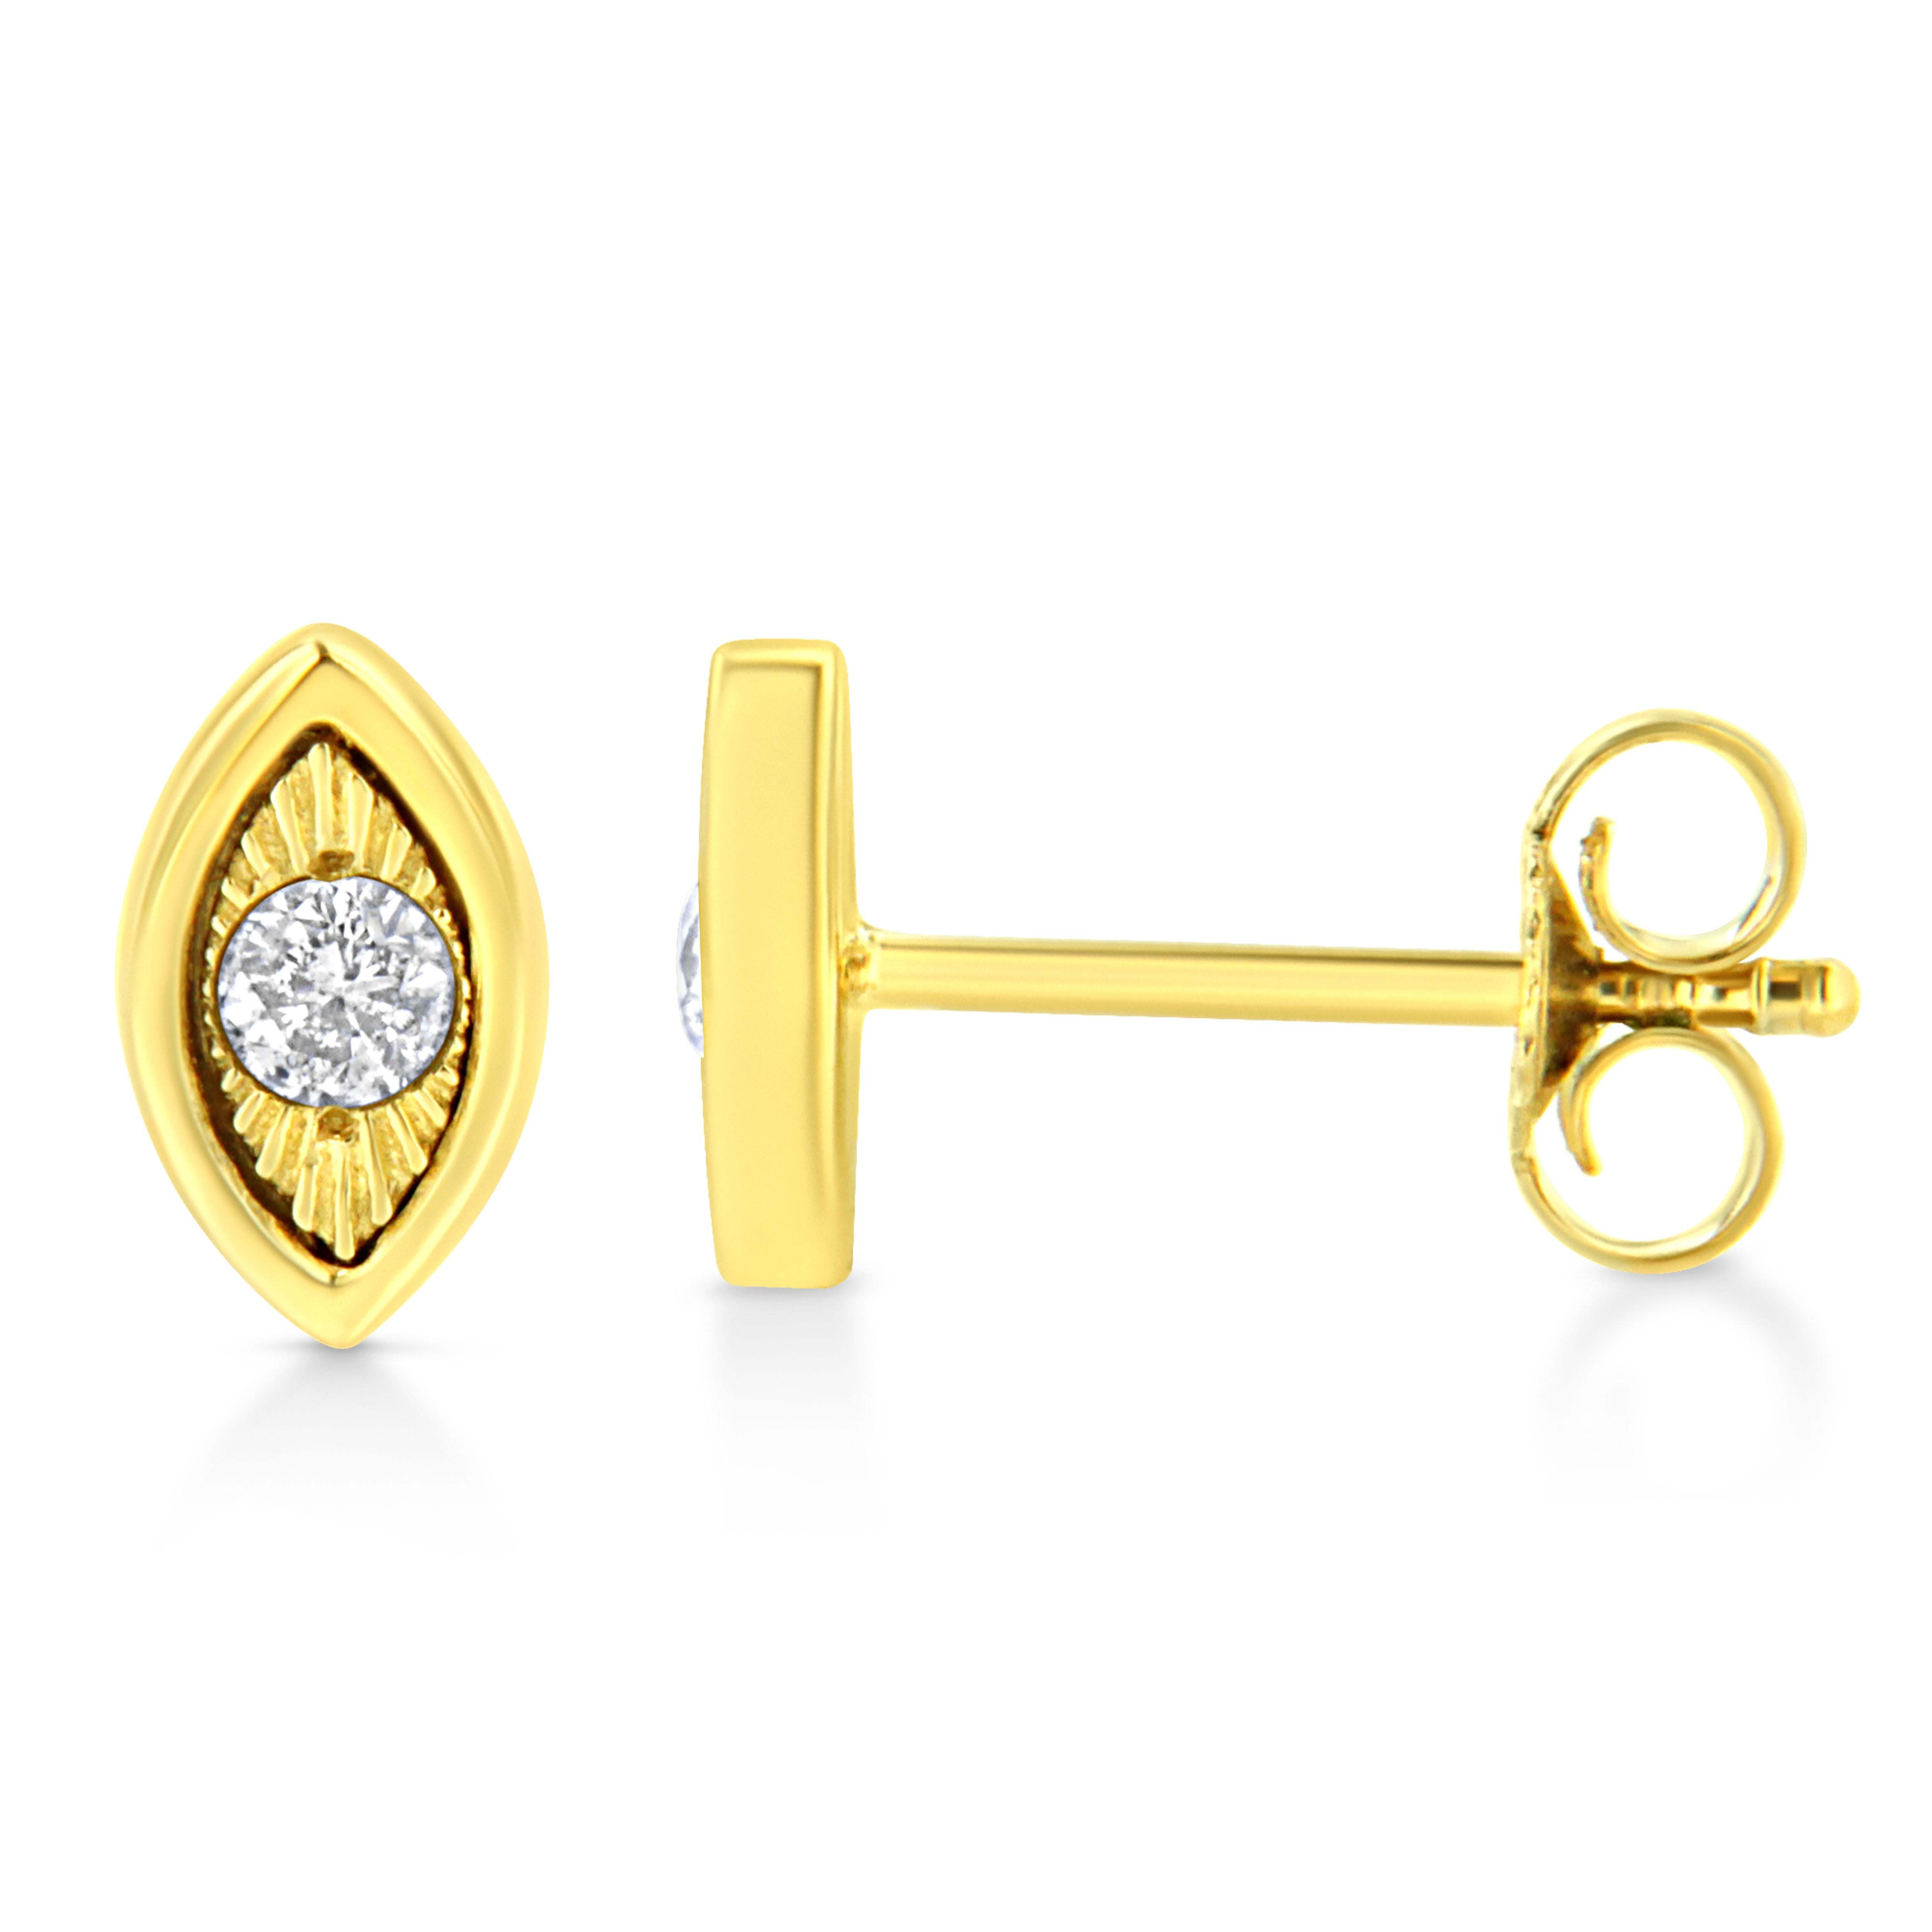 Contemporary Yellow Gold Plated Sterling Silver 1/10 Carat Diamond Stud Earrings For Sale